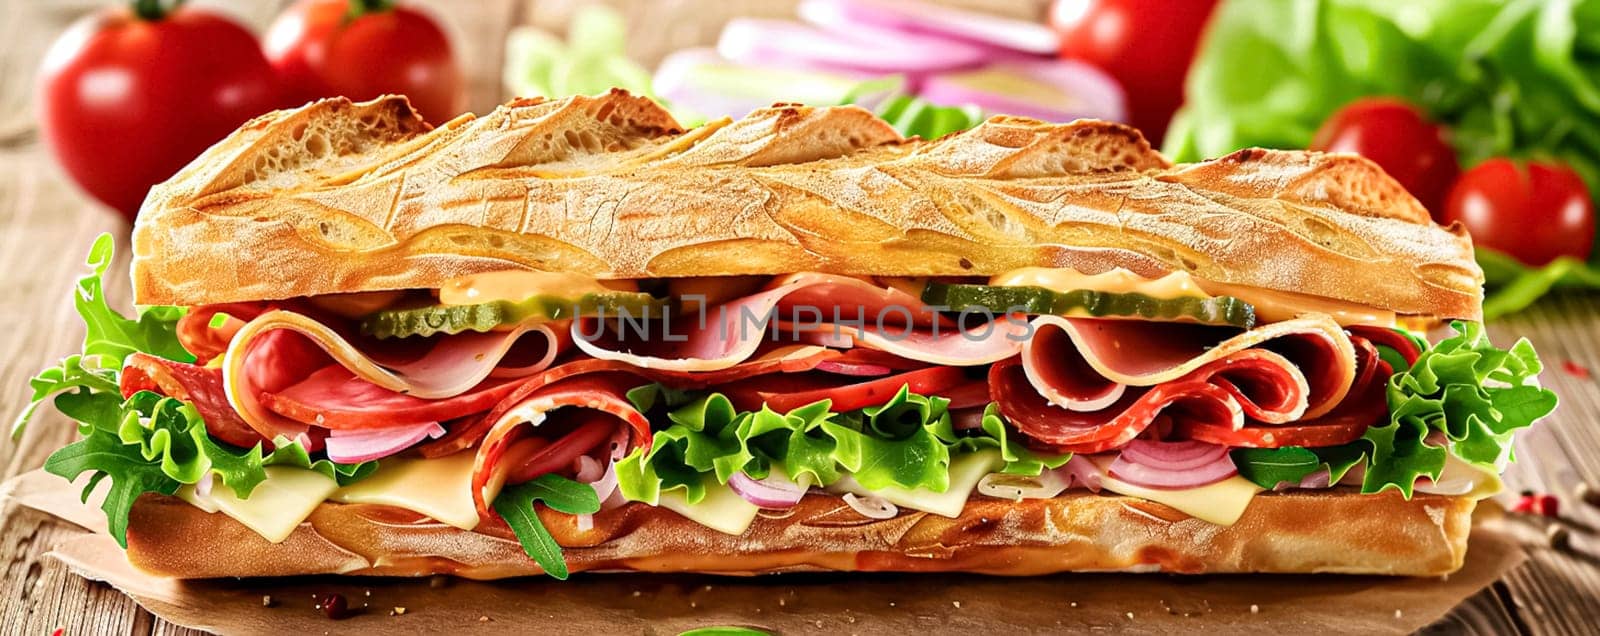 Perfect baguette sandwich, fast food chain menu commercial by Anneleven